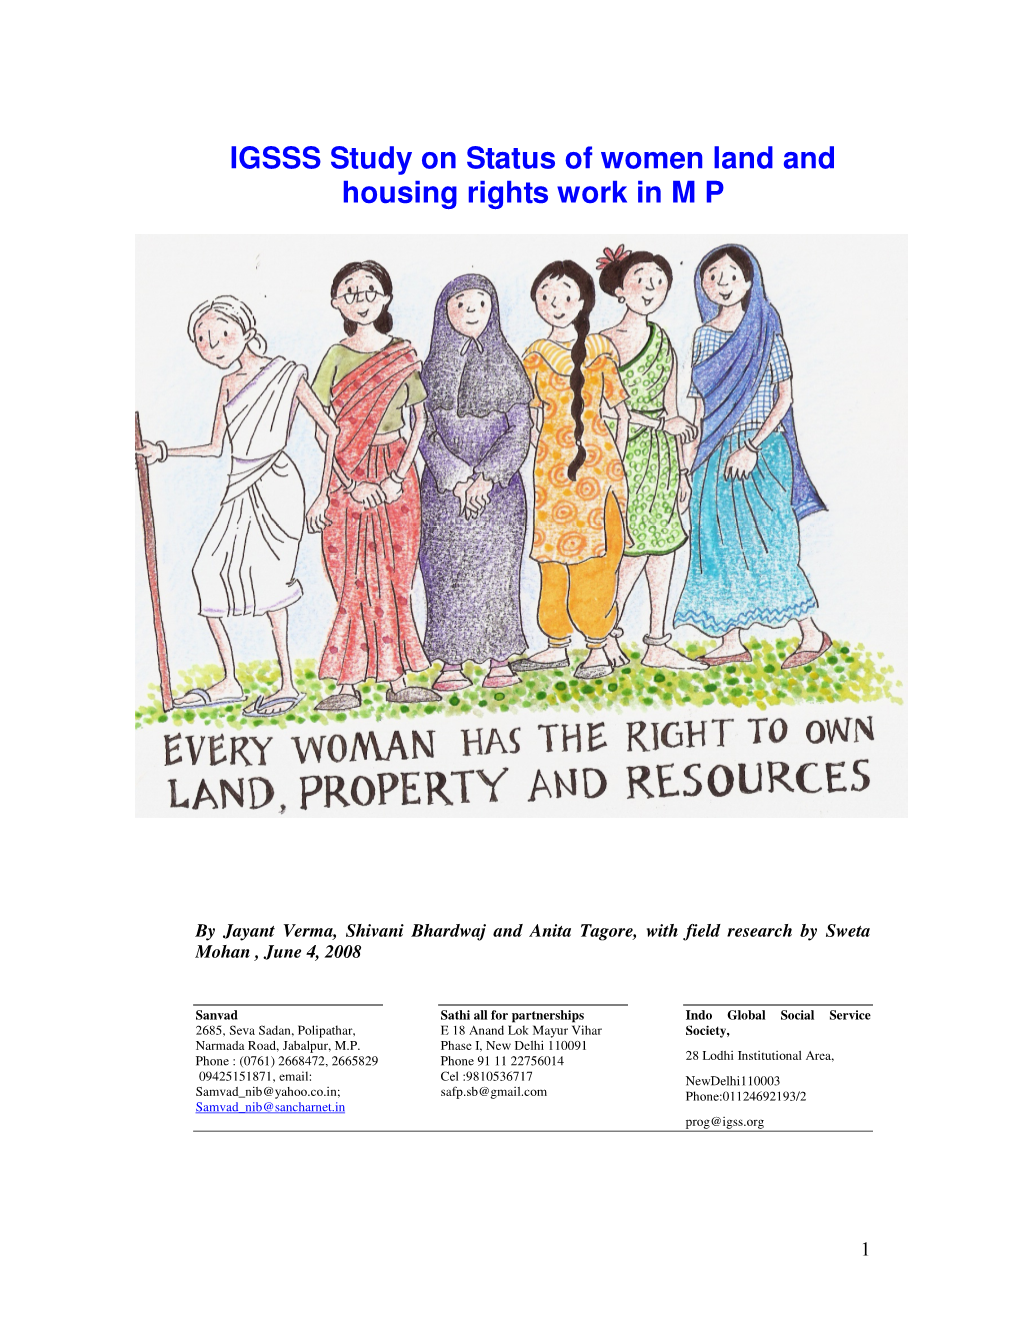 IGSSS Study on Status of Women Land and Housing Rights Work in M P